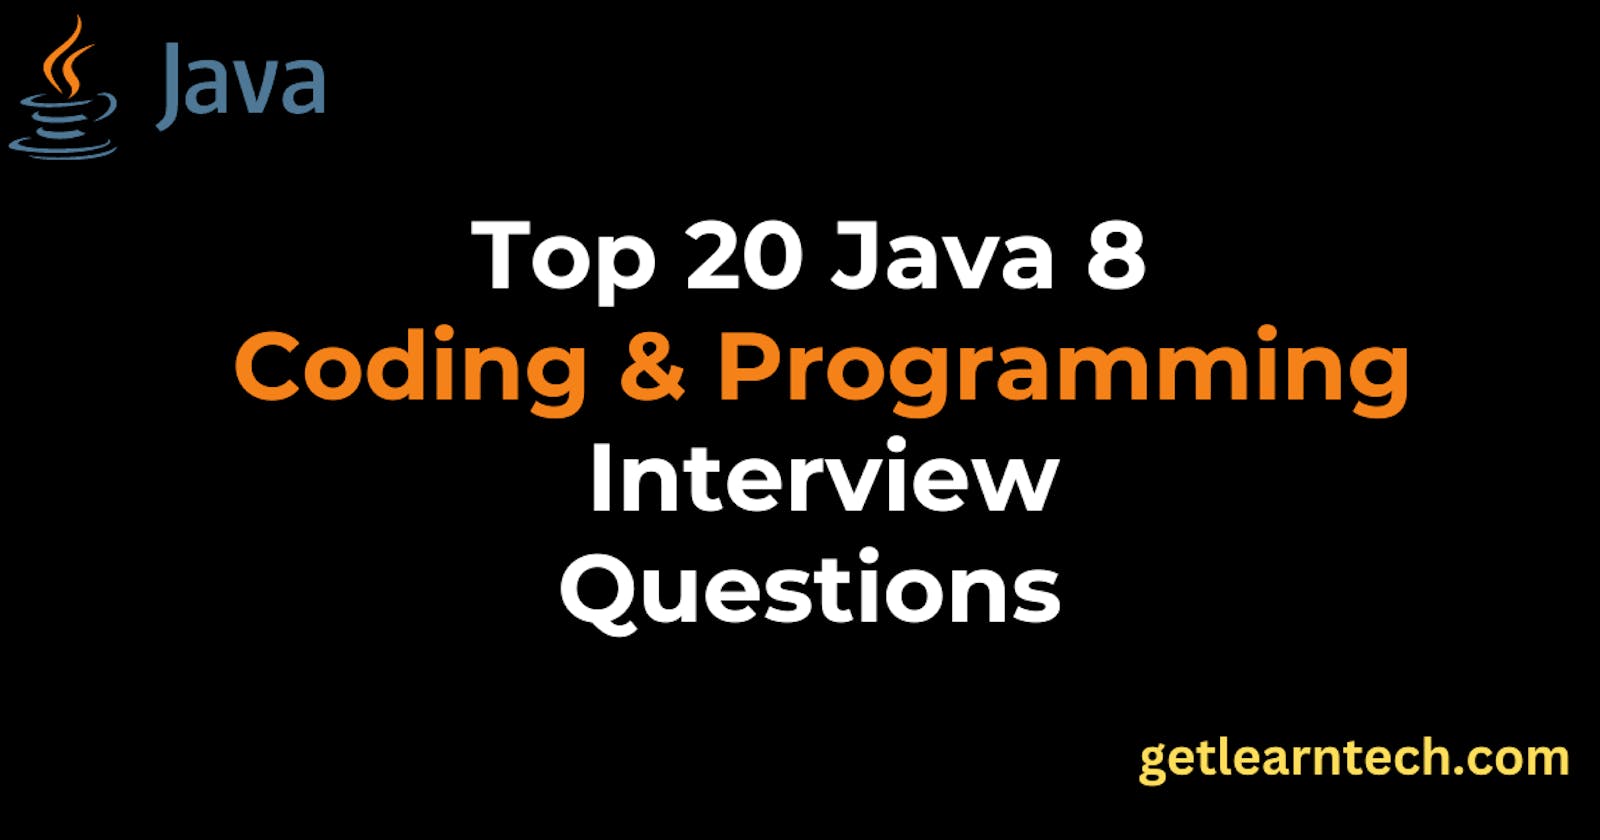 Top 20 Java 8 Coding and Programming Interview Questions